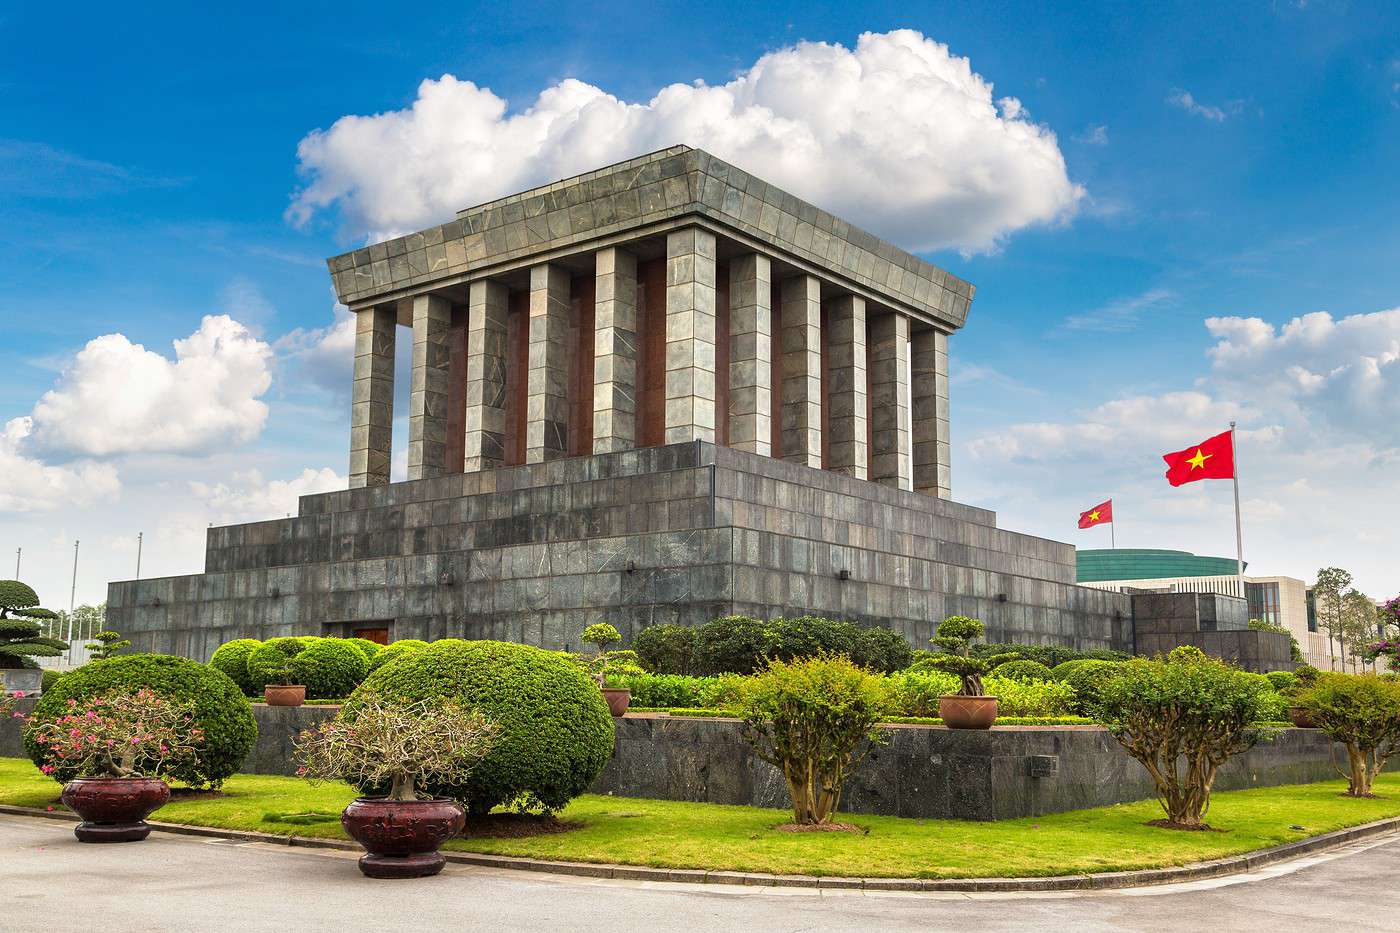 Ho Chi Minh Mausoleum: A MUST-SEE in your trip to Hanoi